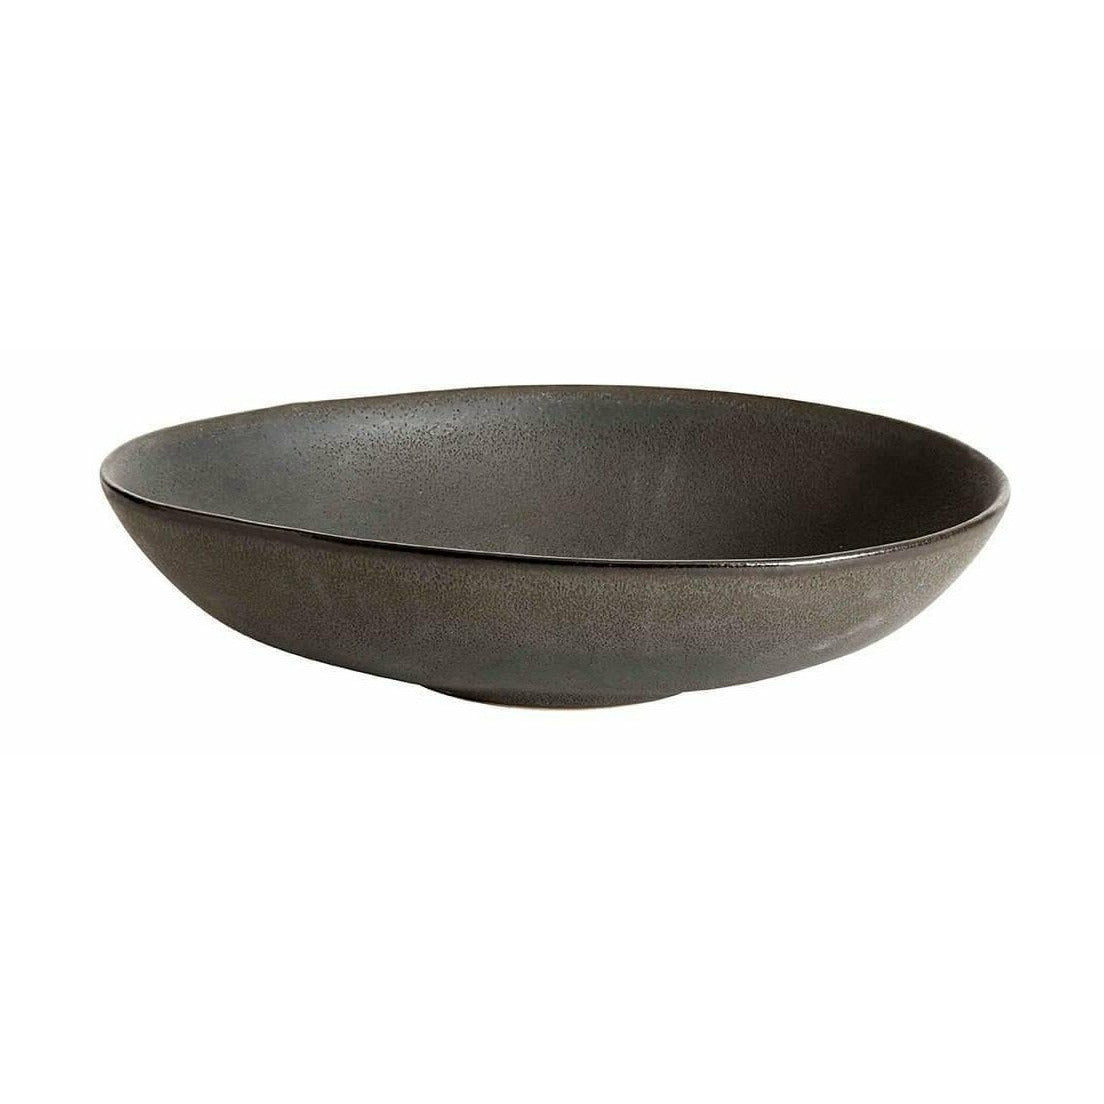 Muubs Mame Sirving Bowl Coffee, 19 cm